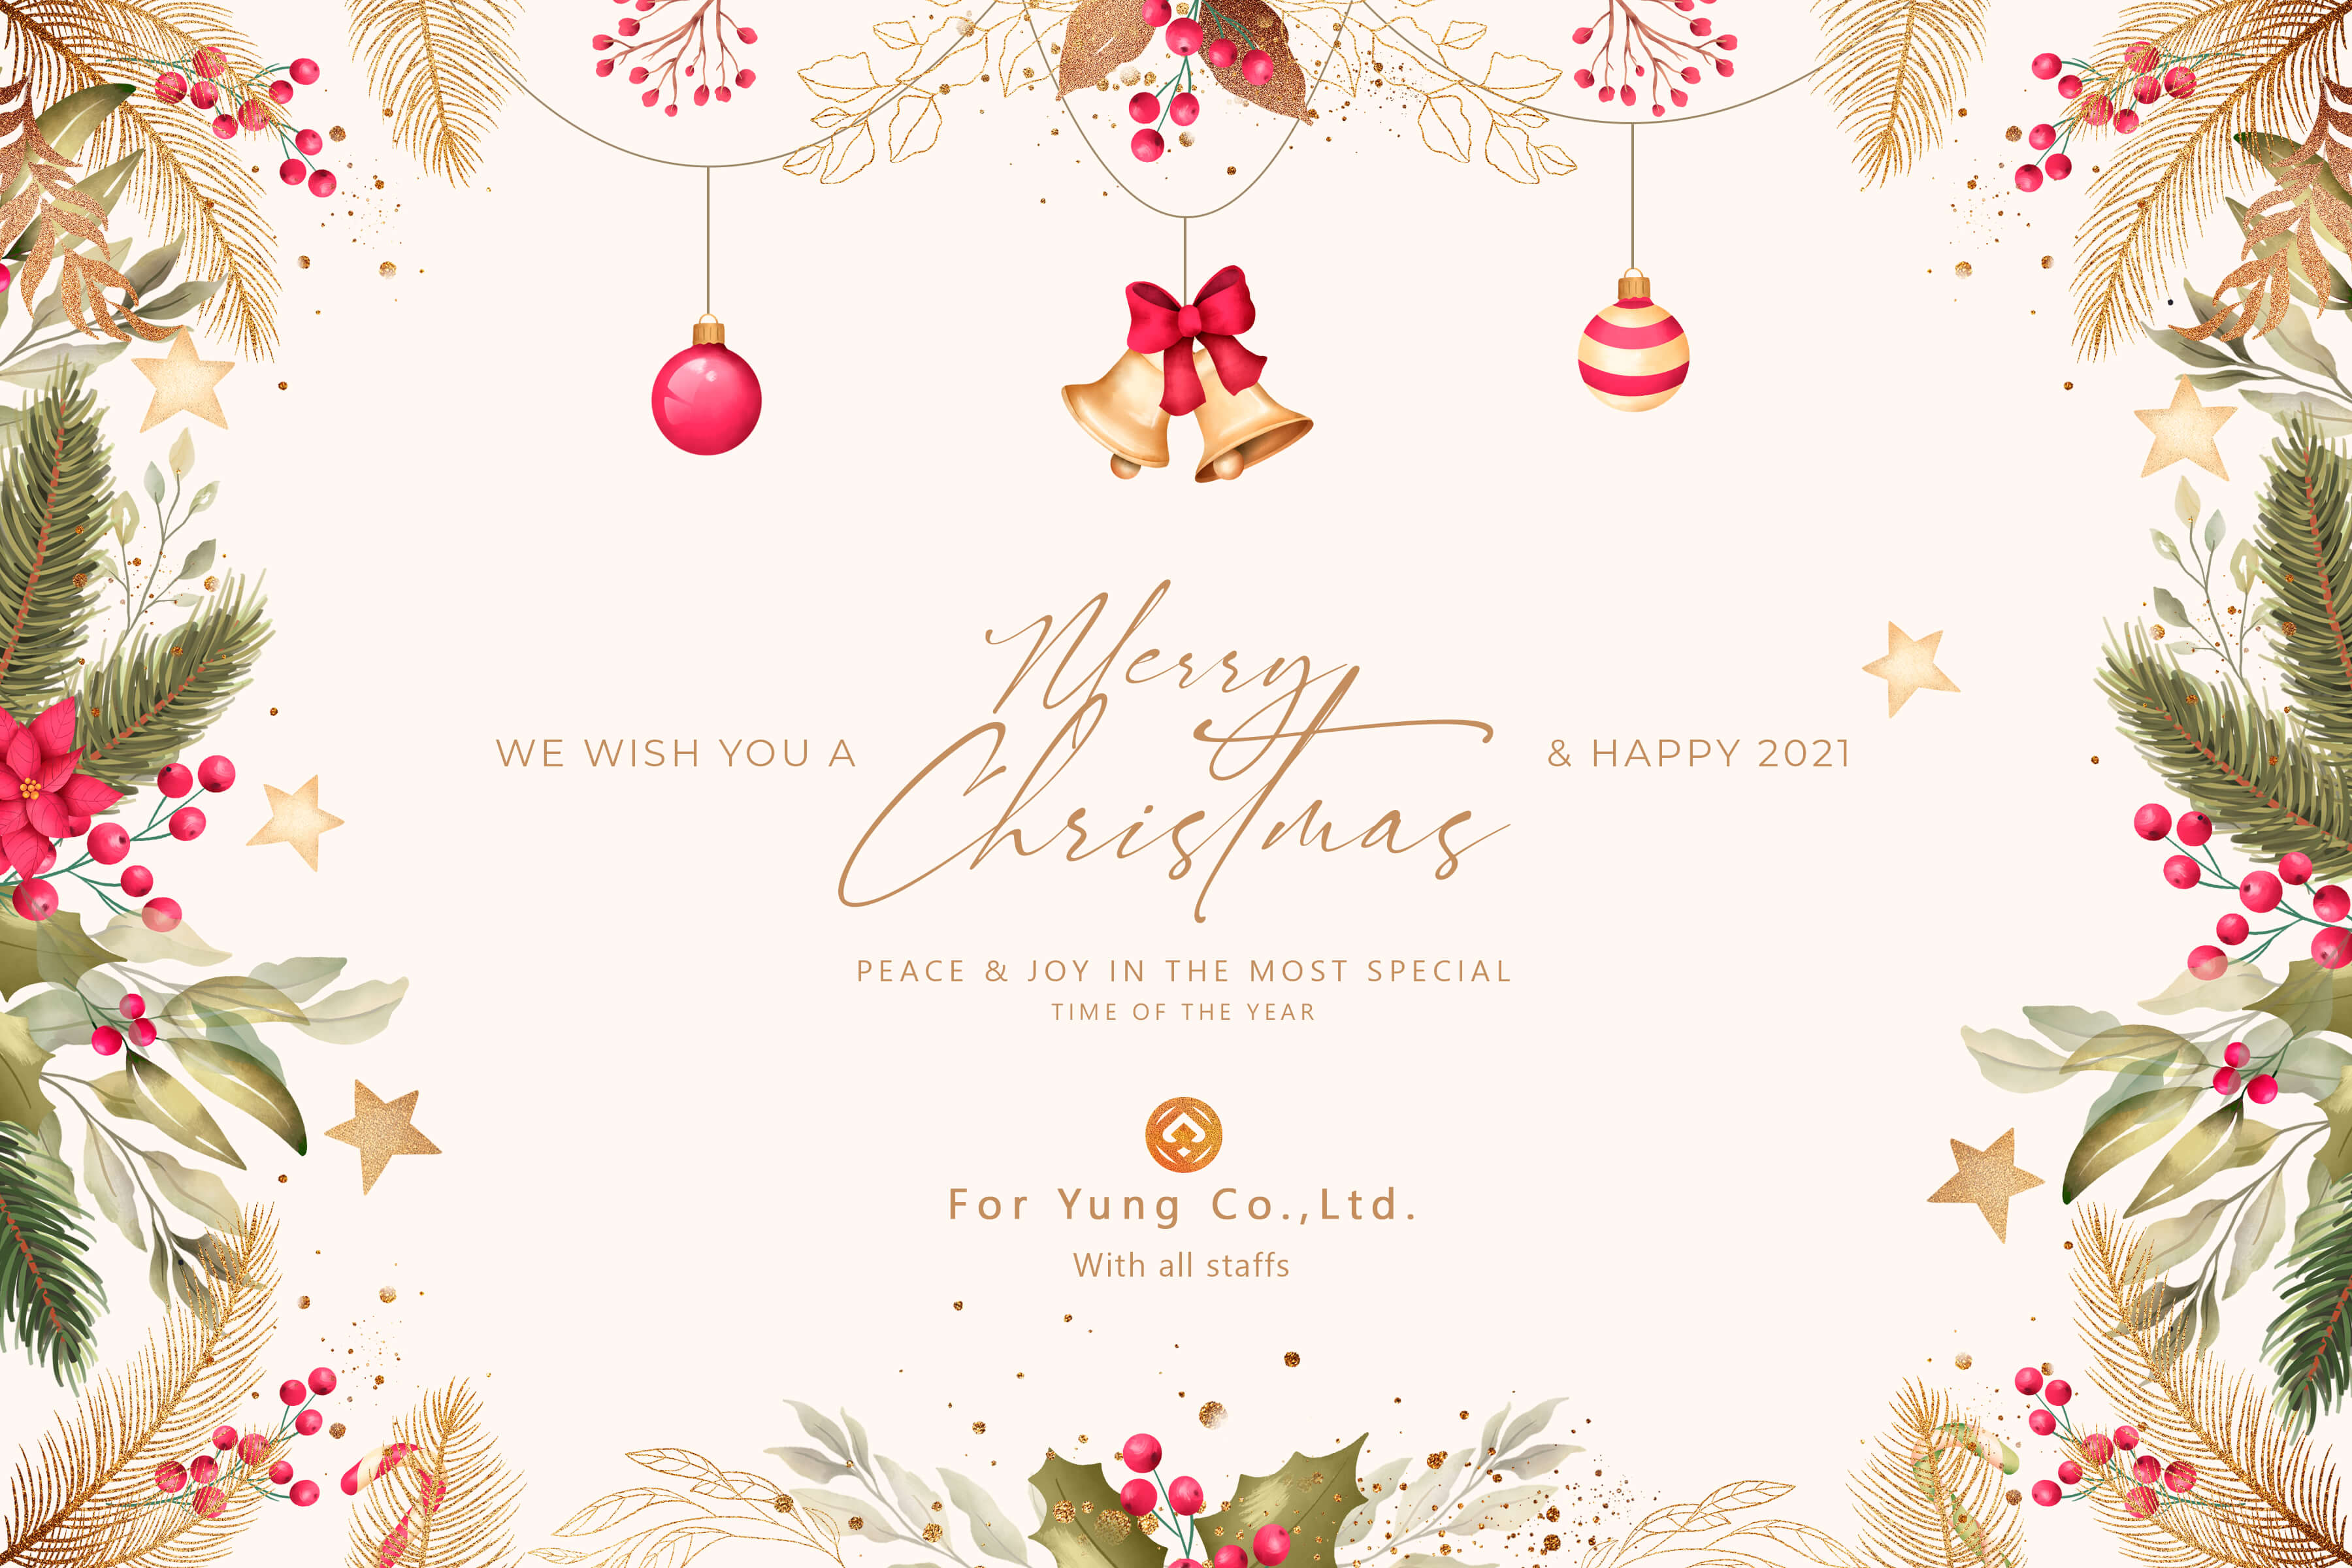 Have a merry Christmas and prosperous New Year!